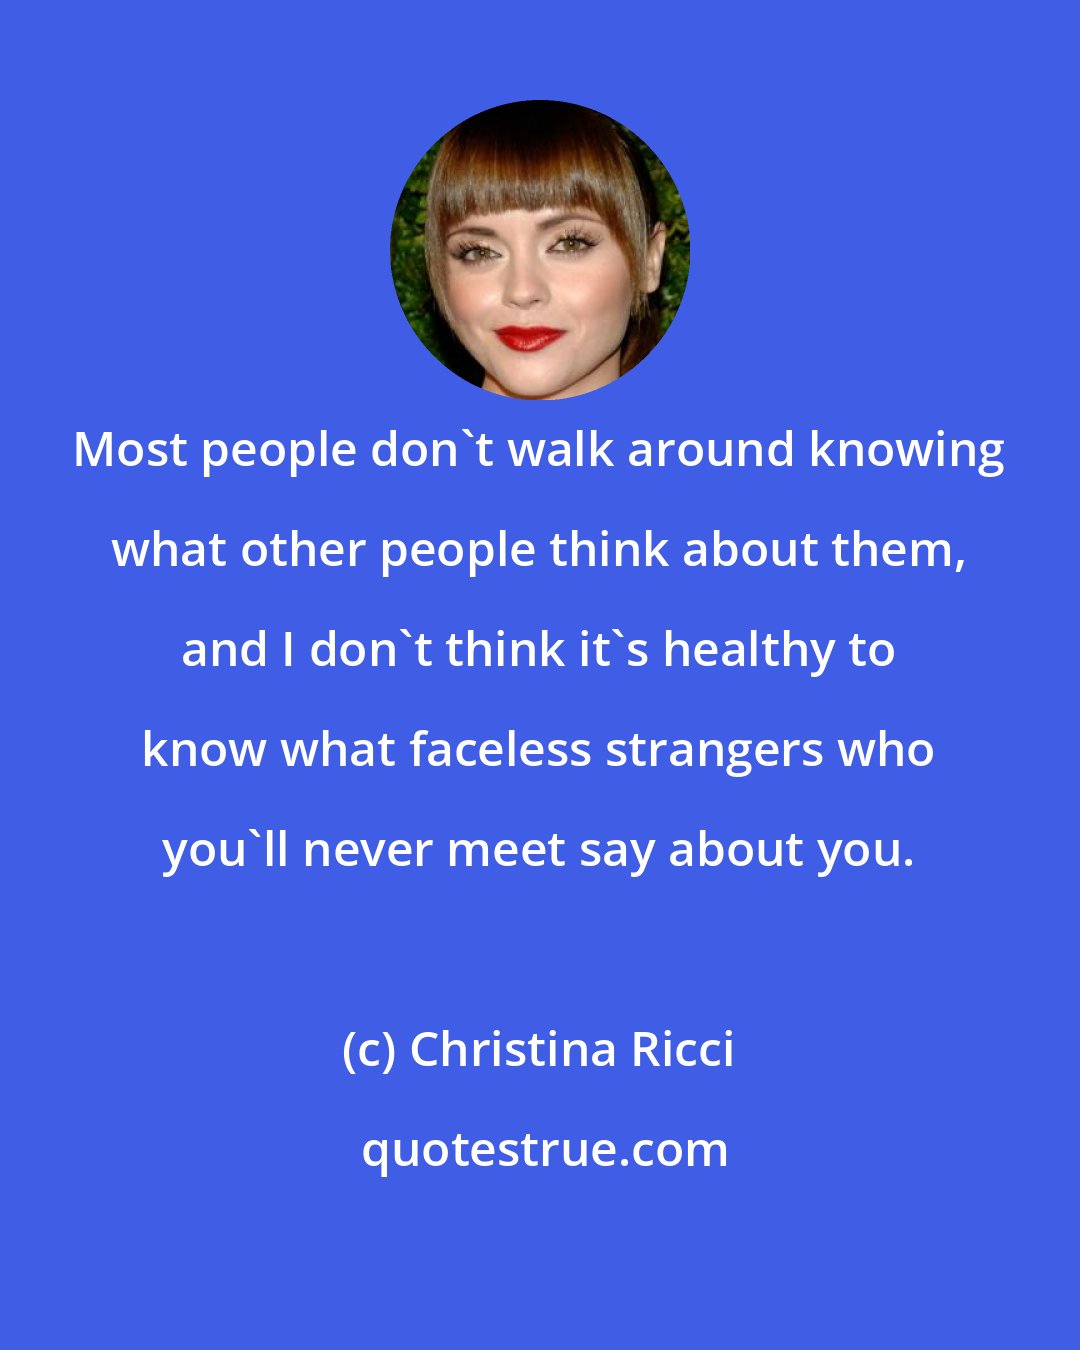 Christina Ricci: Most people don't walk around knowing what other people think about them, and I don't think it's healthy to know what faceless strangers who you'll never meet say about you.